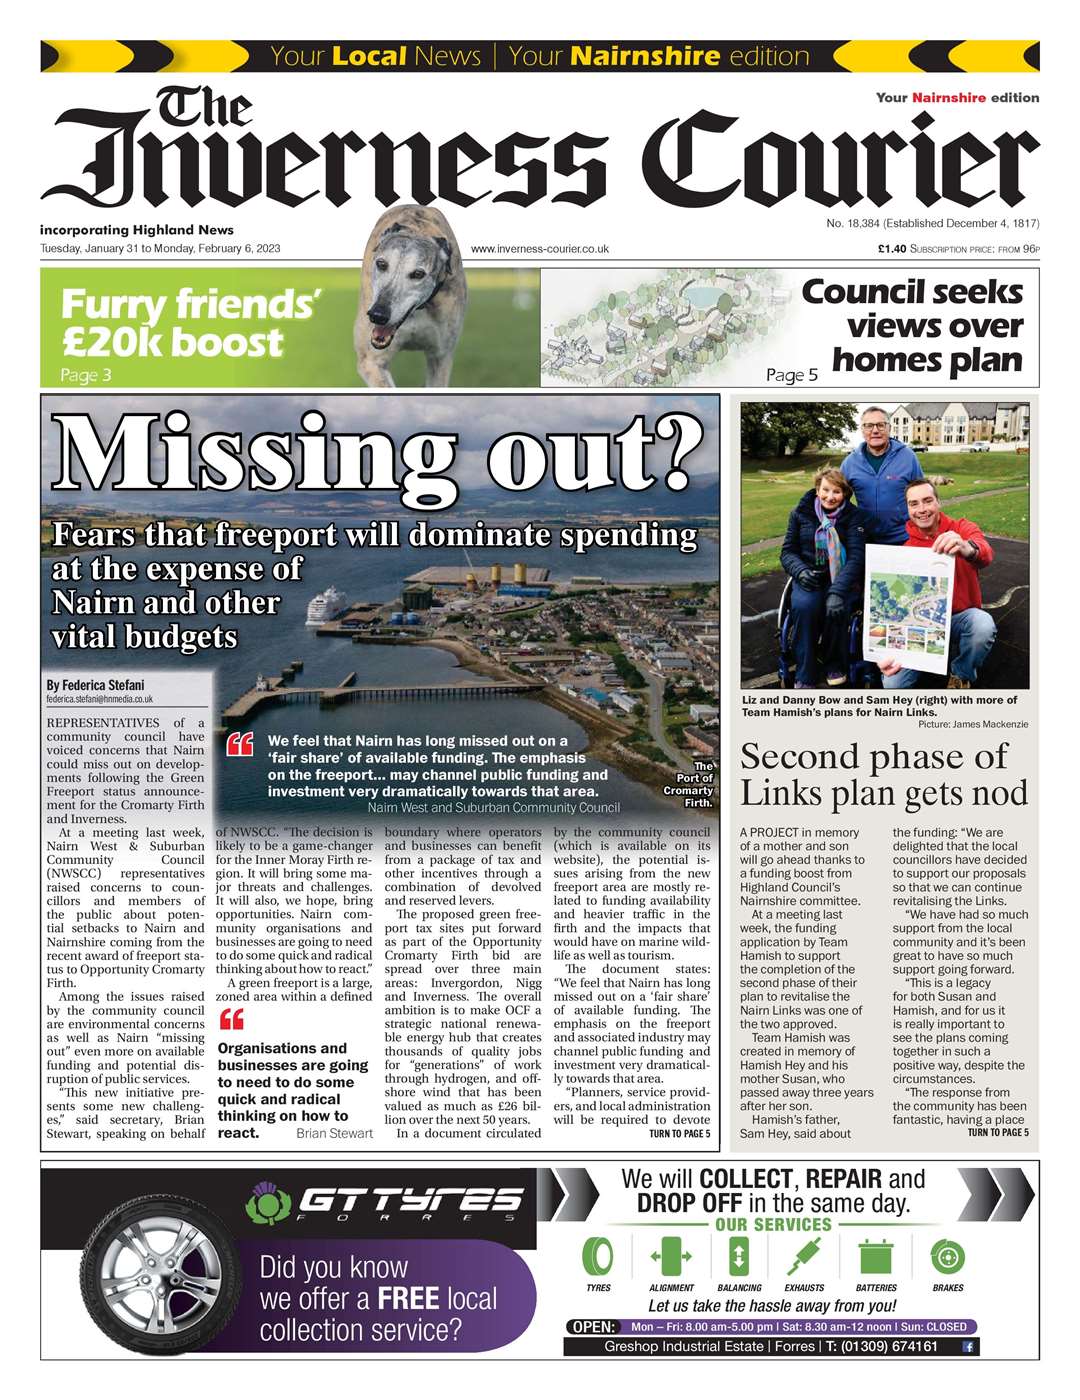 The Inverness Courier (Nairnshire edition), January 31, front page.